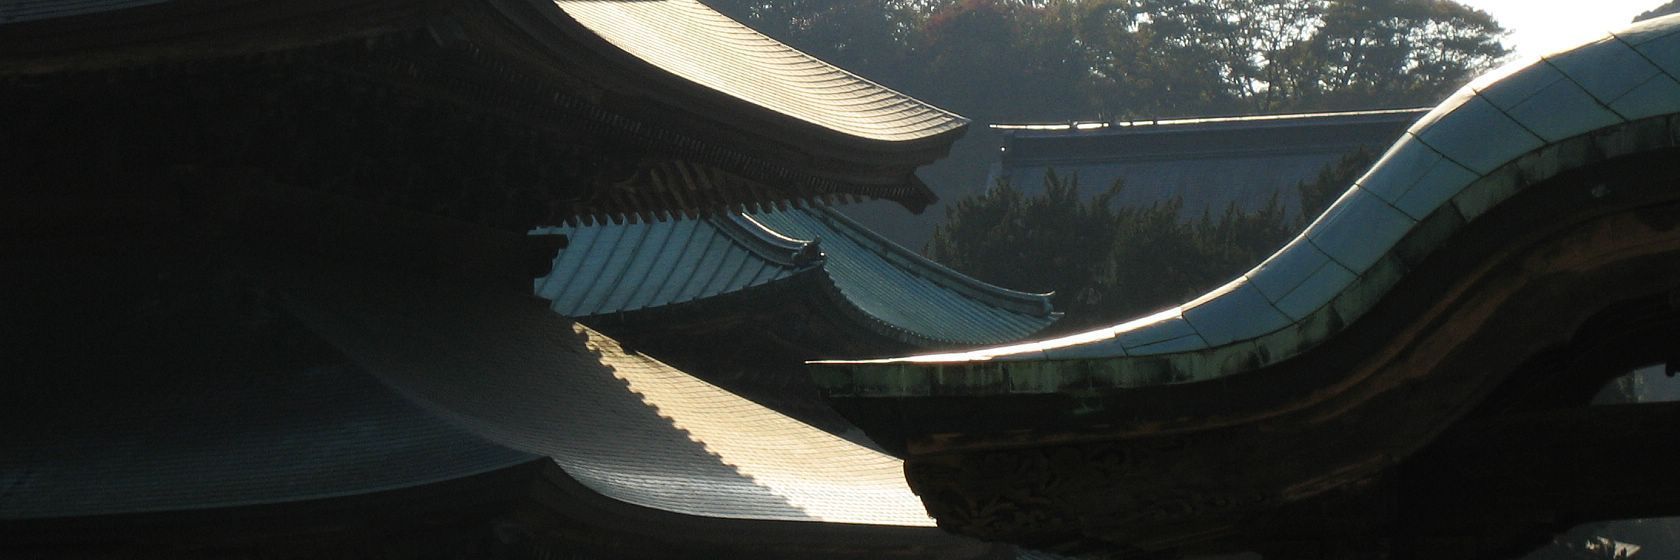 ancient japanese temples